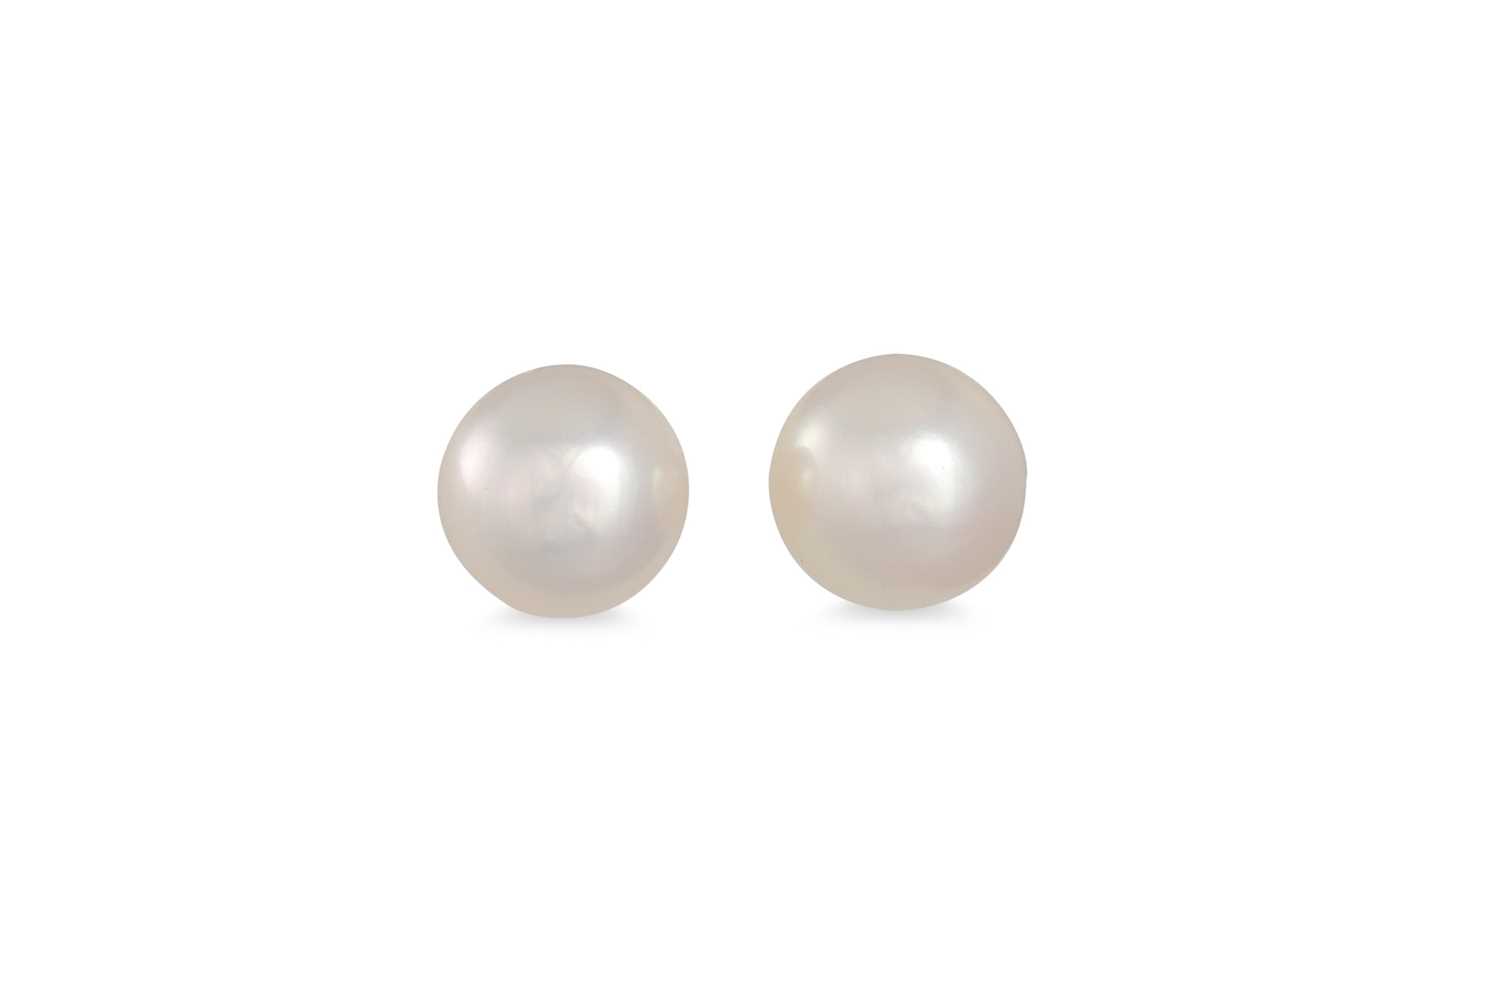 Lot 37 - A PAIR OF PEARL EARRINGS, mounted in 9ct gold